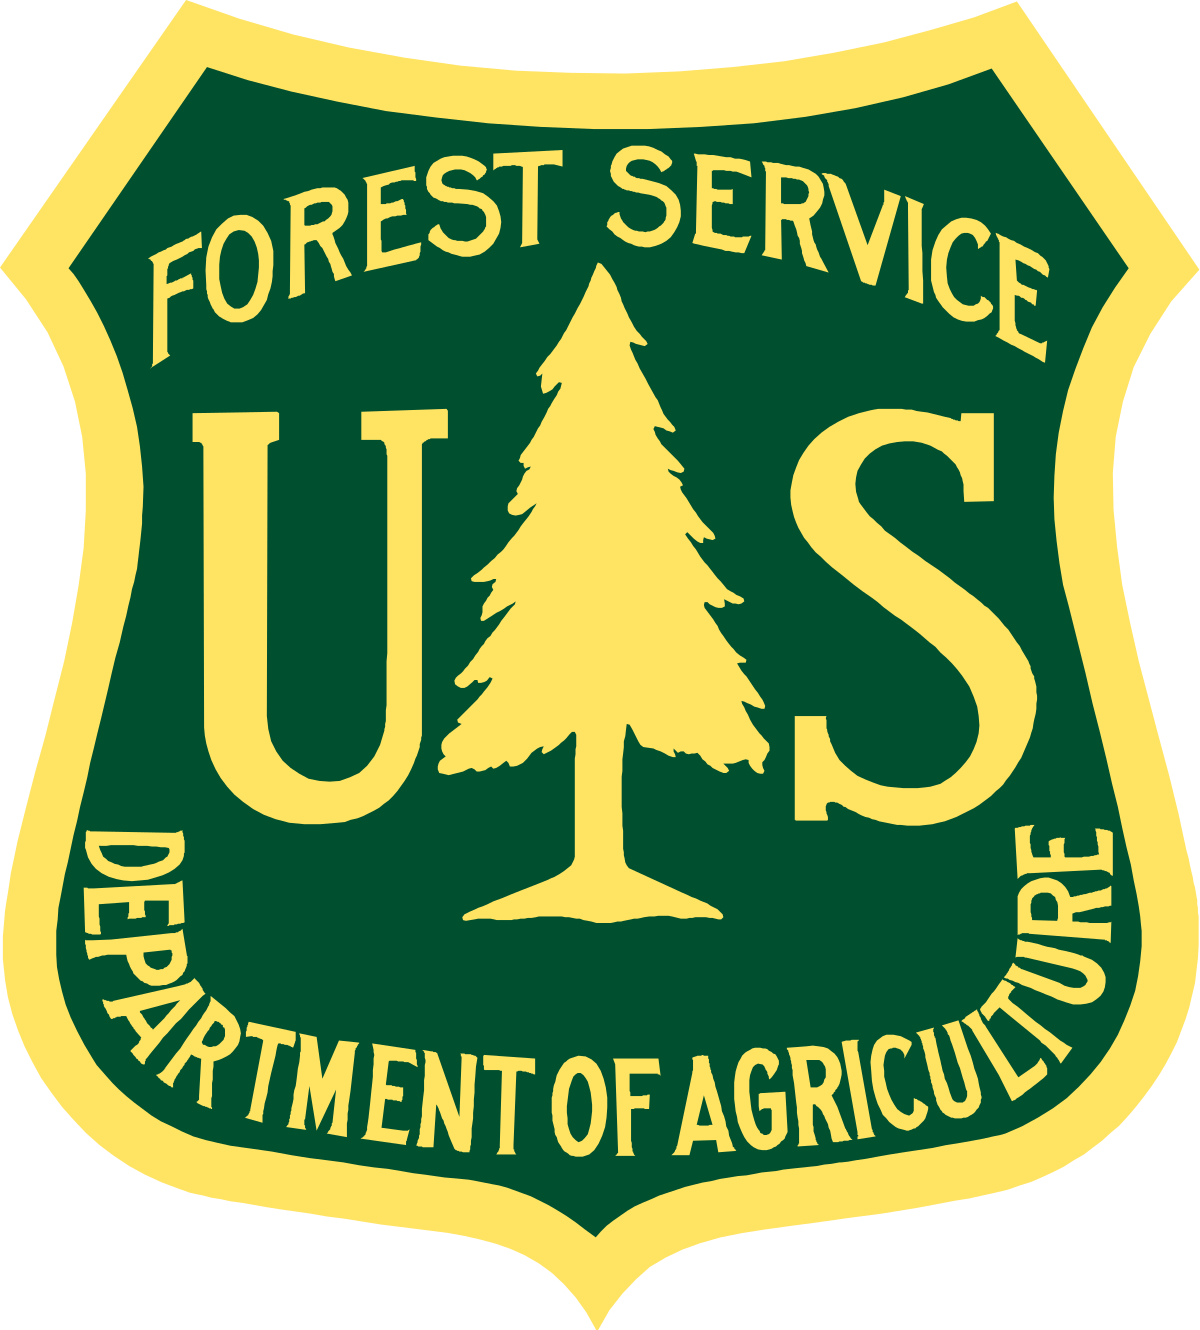 The U.S. Department of Agriculture Forest Service (USFS)